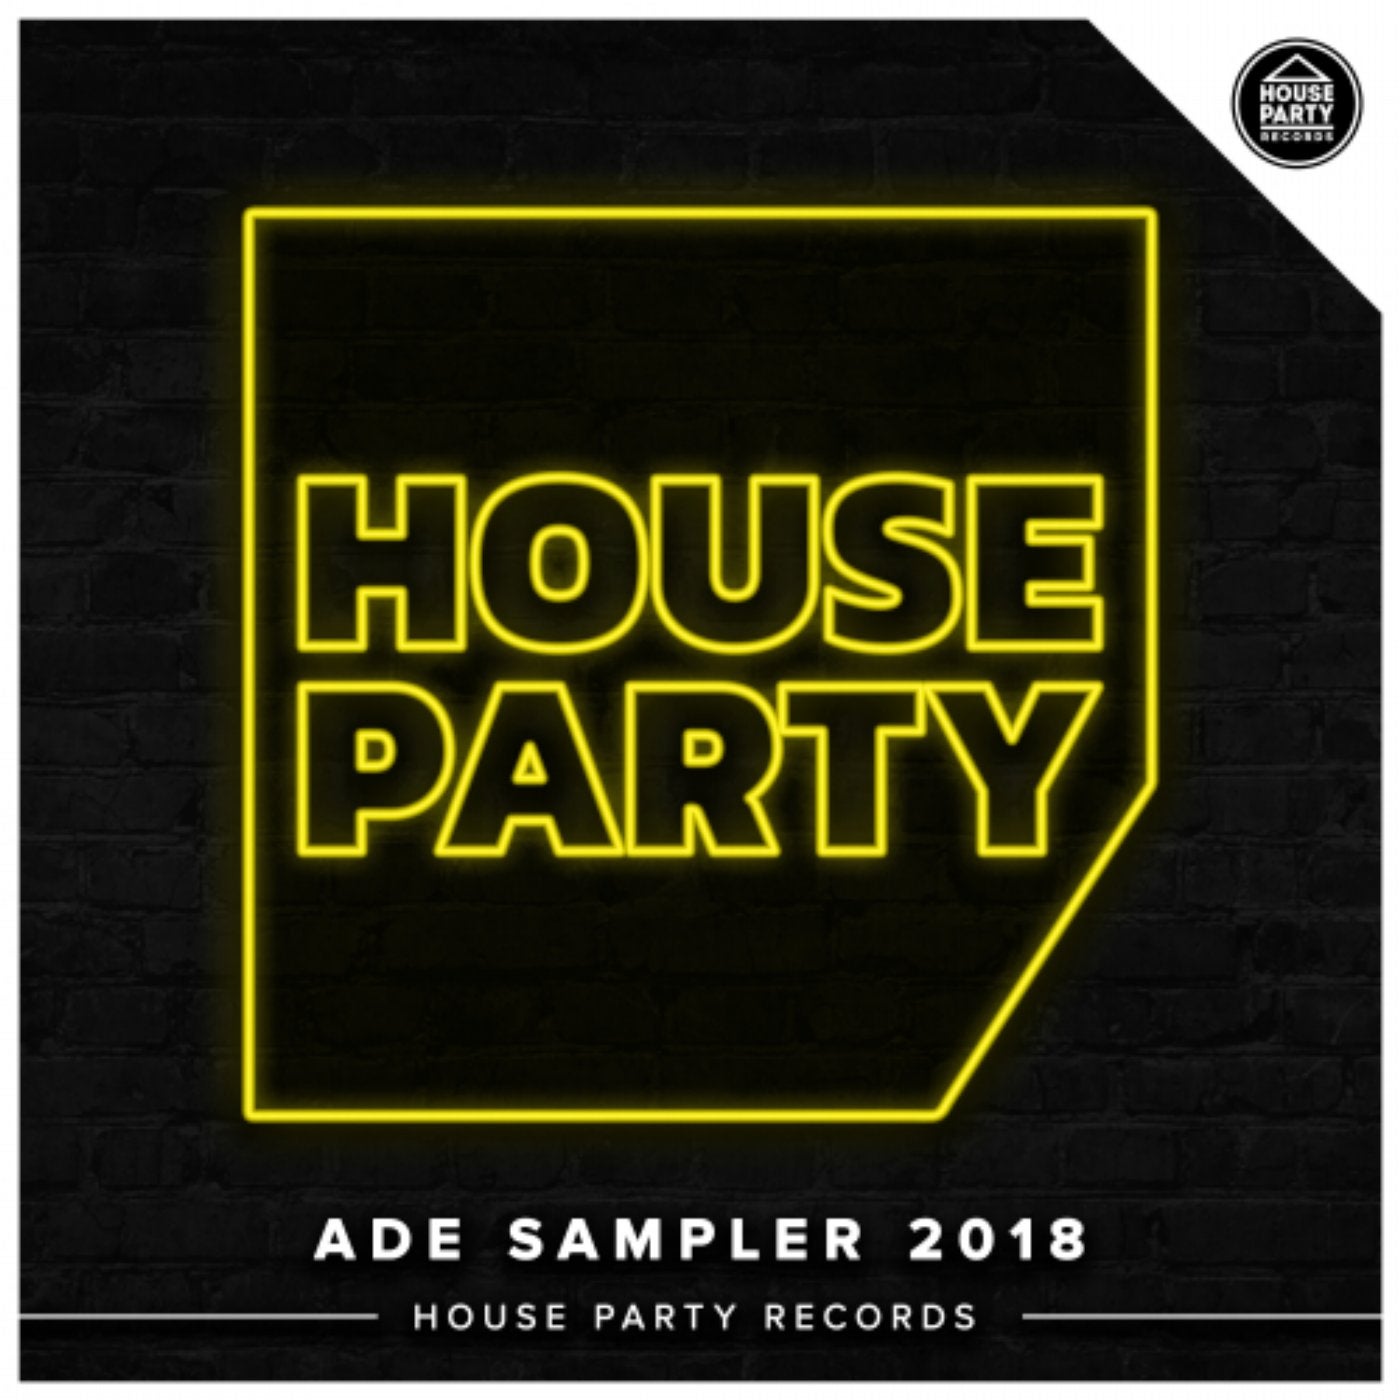 House Party ADE Sampler 2018